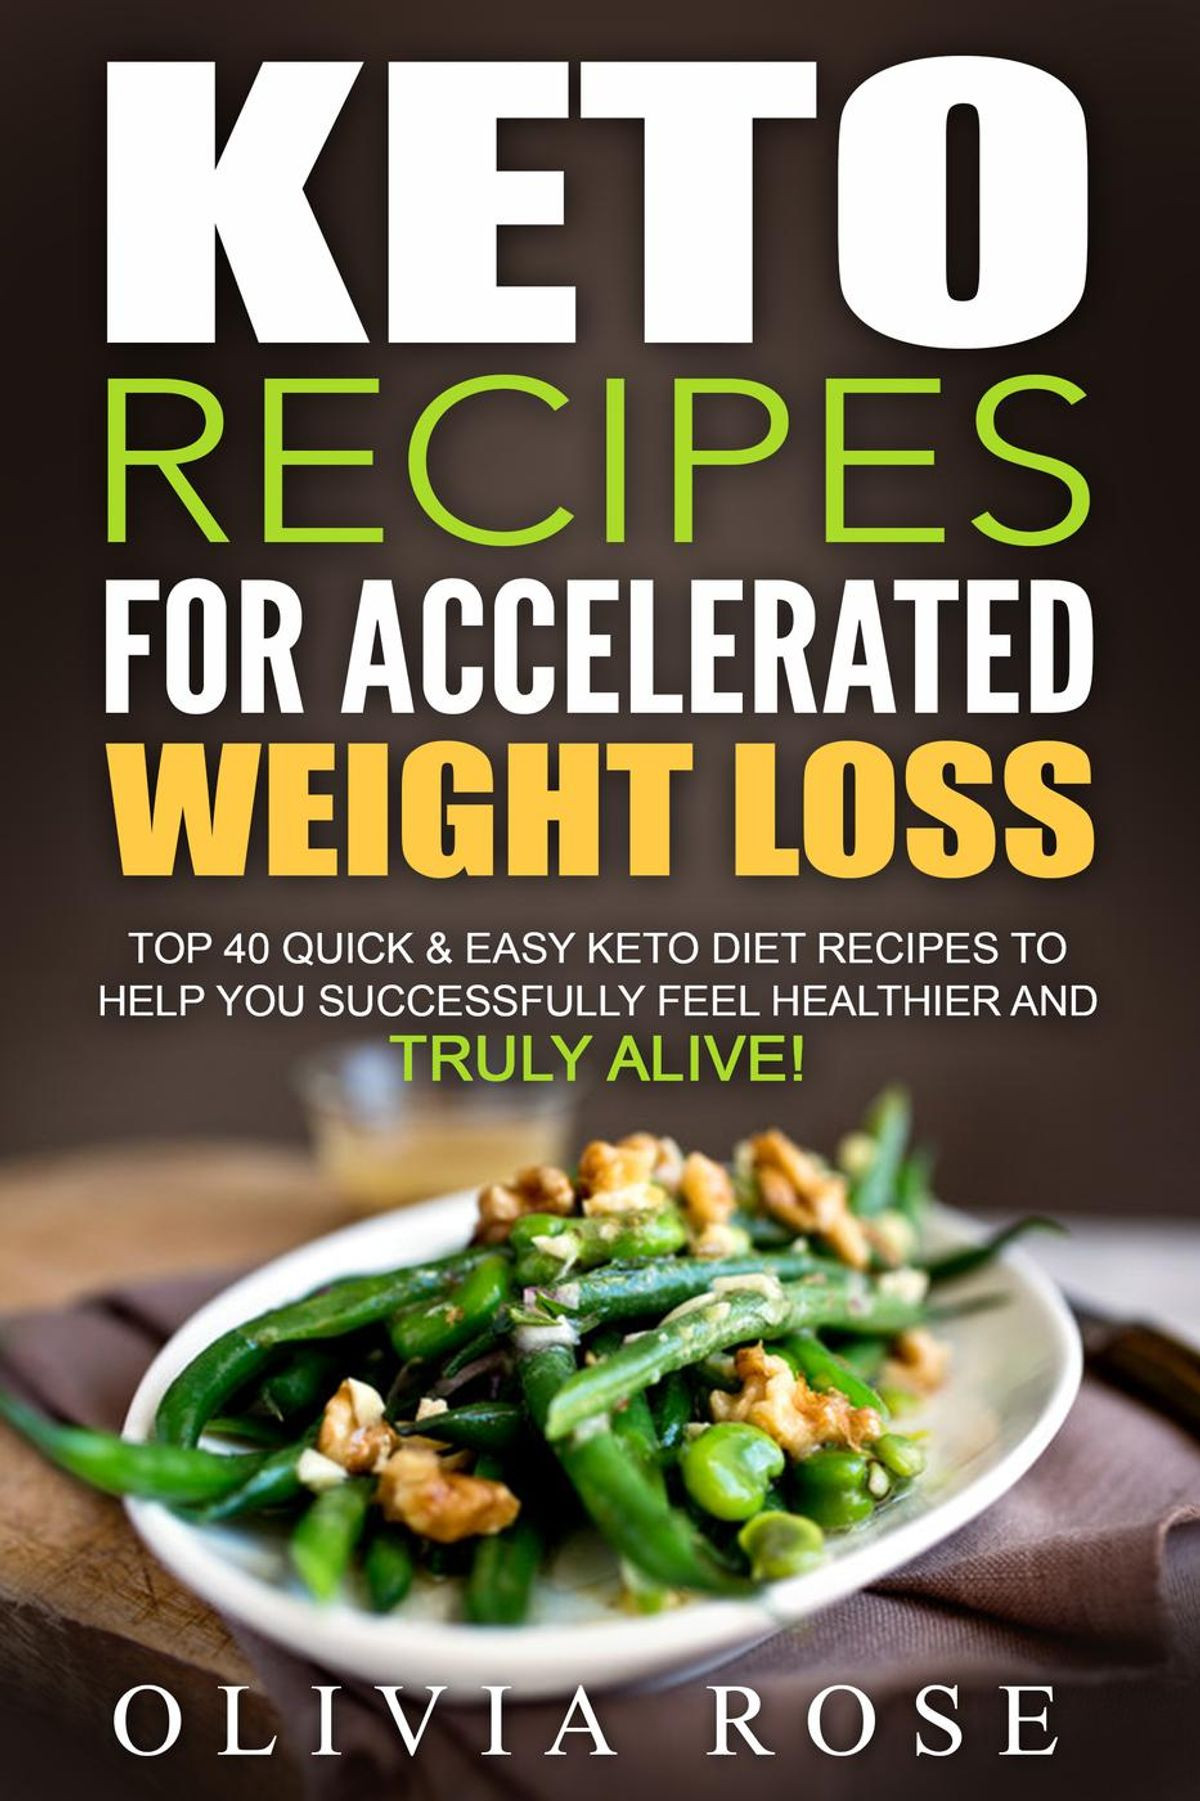 Weight Loss Food Recipes
 Keto Recipes for Accelerated Weight Loss Top 40 Quick